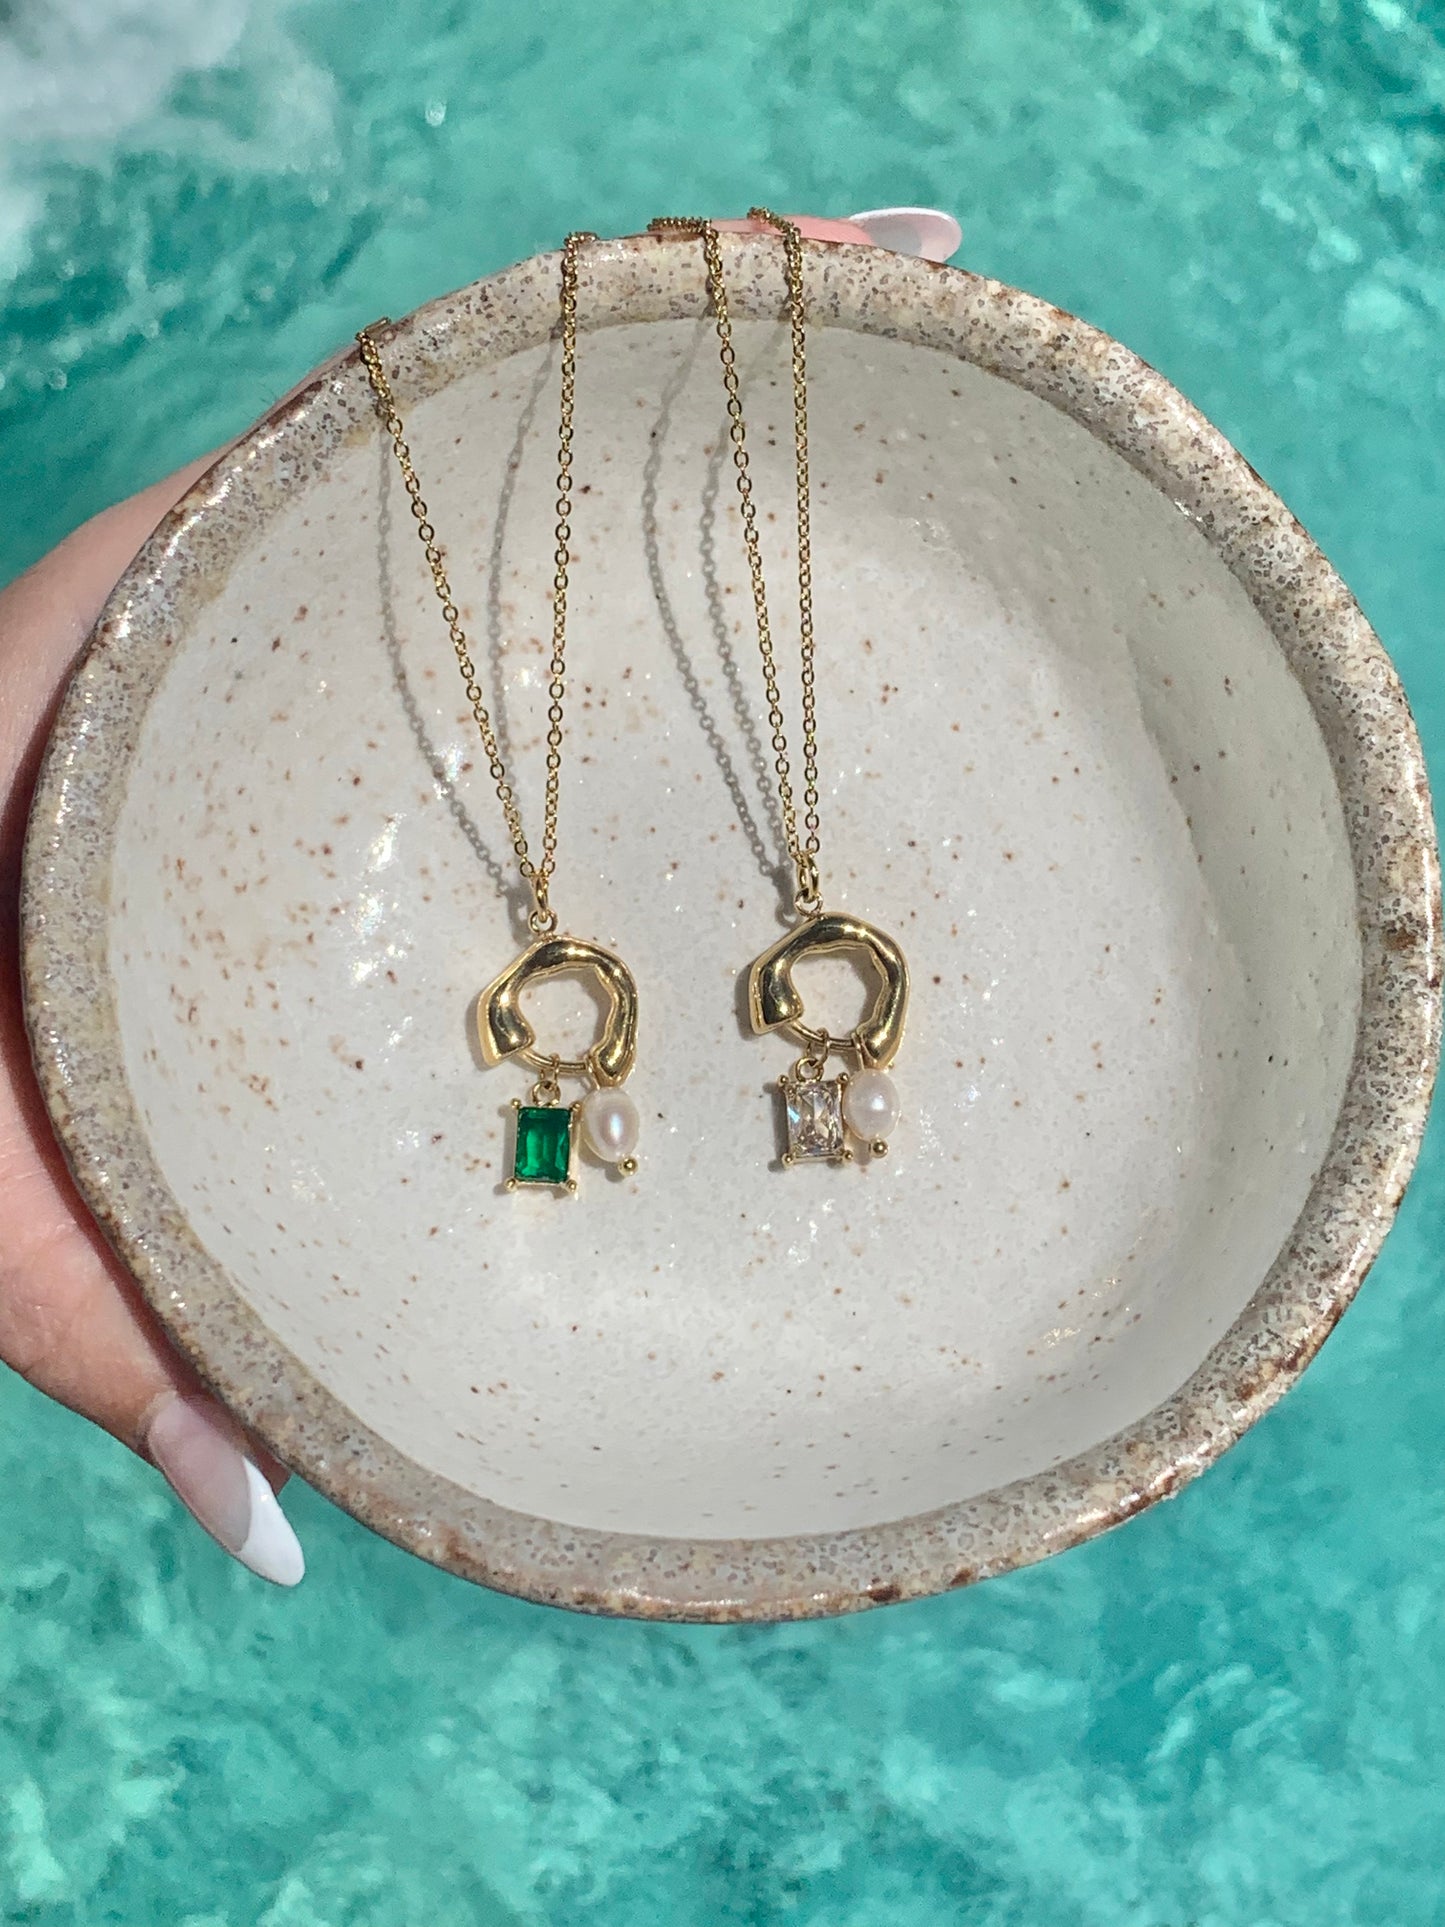 O EMERALD CHARM NECKLACE